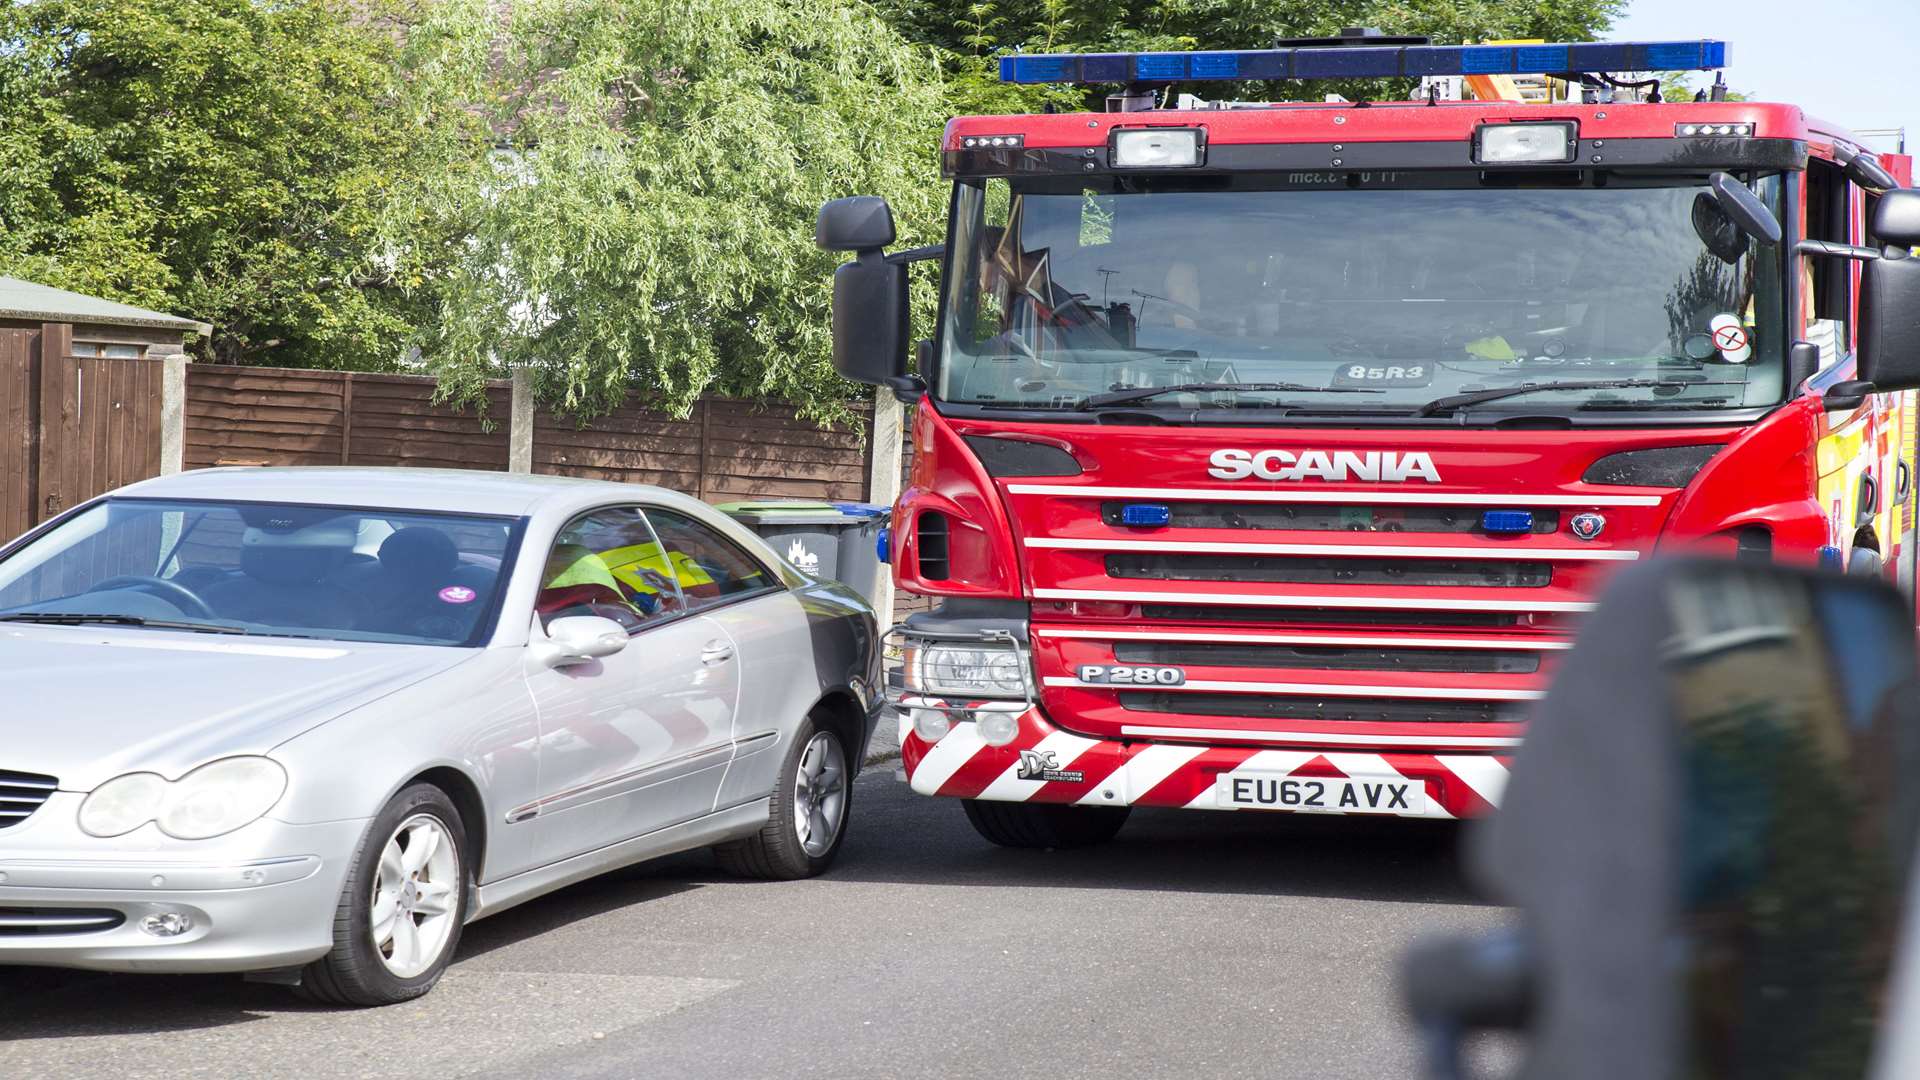 Fire crews are calling on residents to park considerately